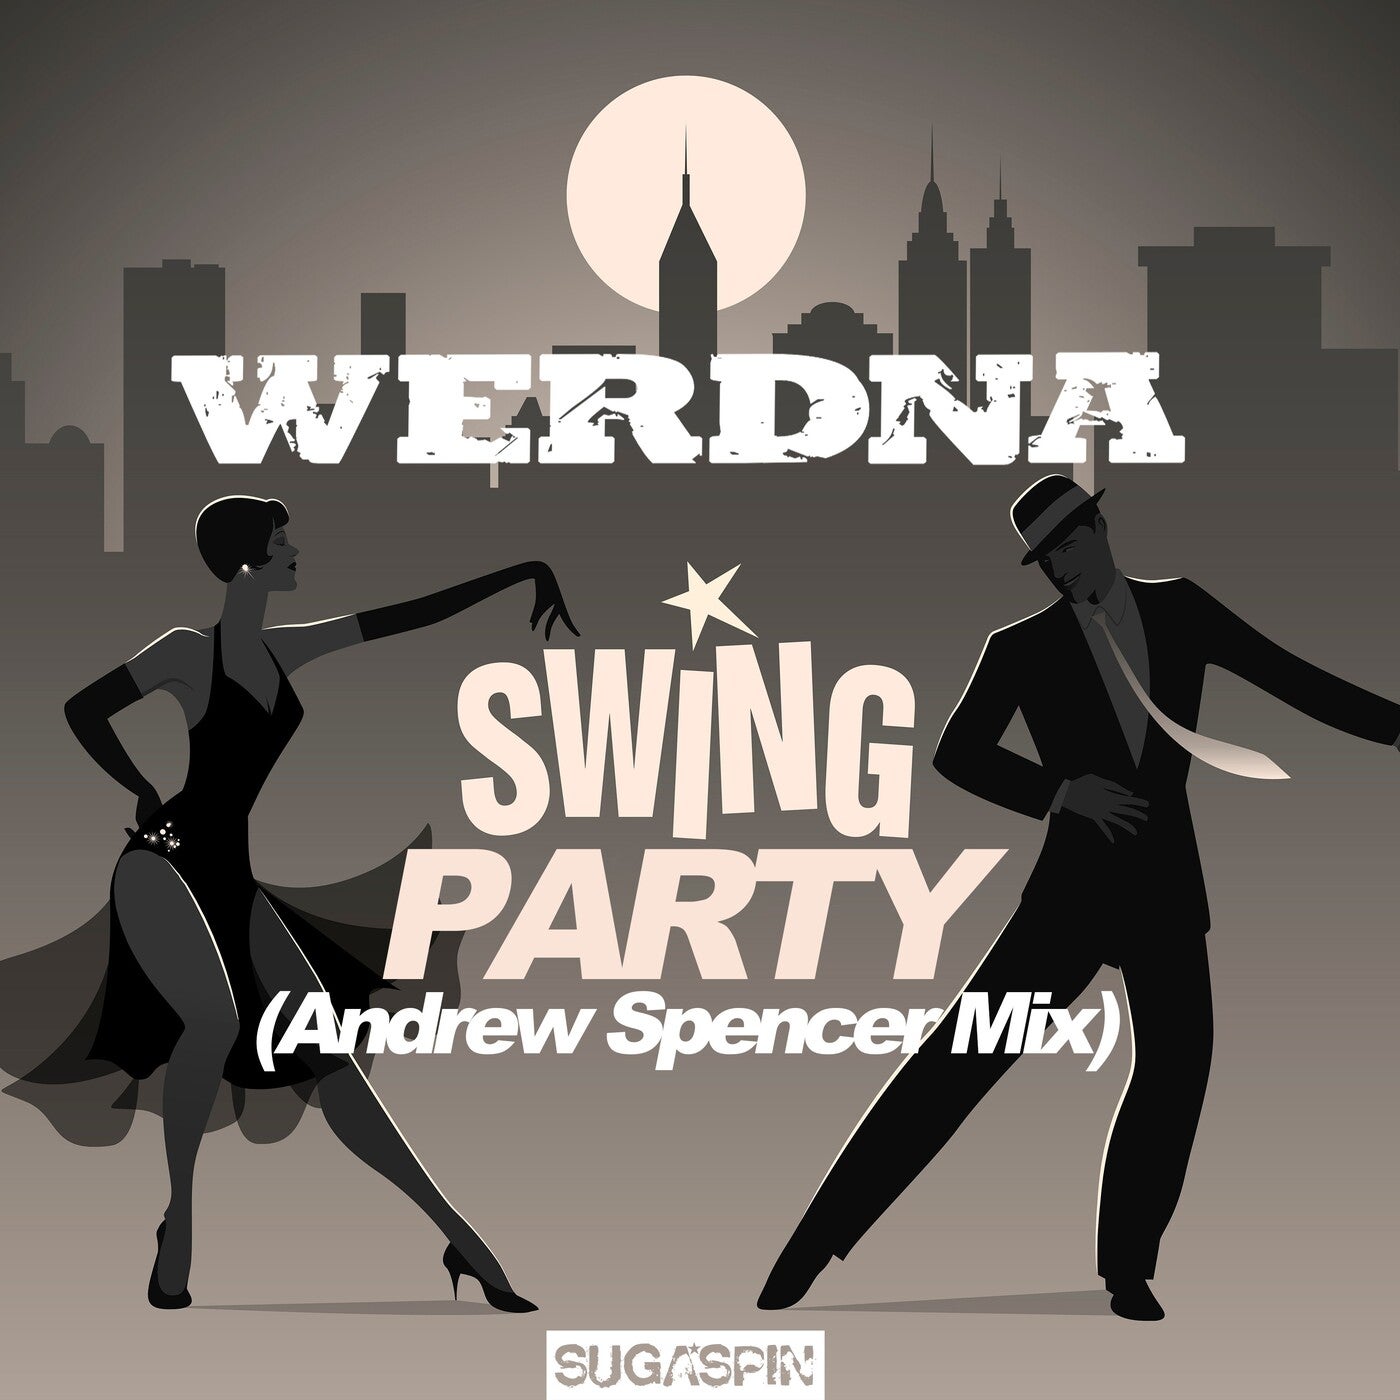 Swing Party (Andrew Spencer Mix)